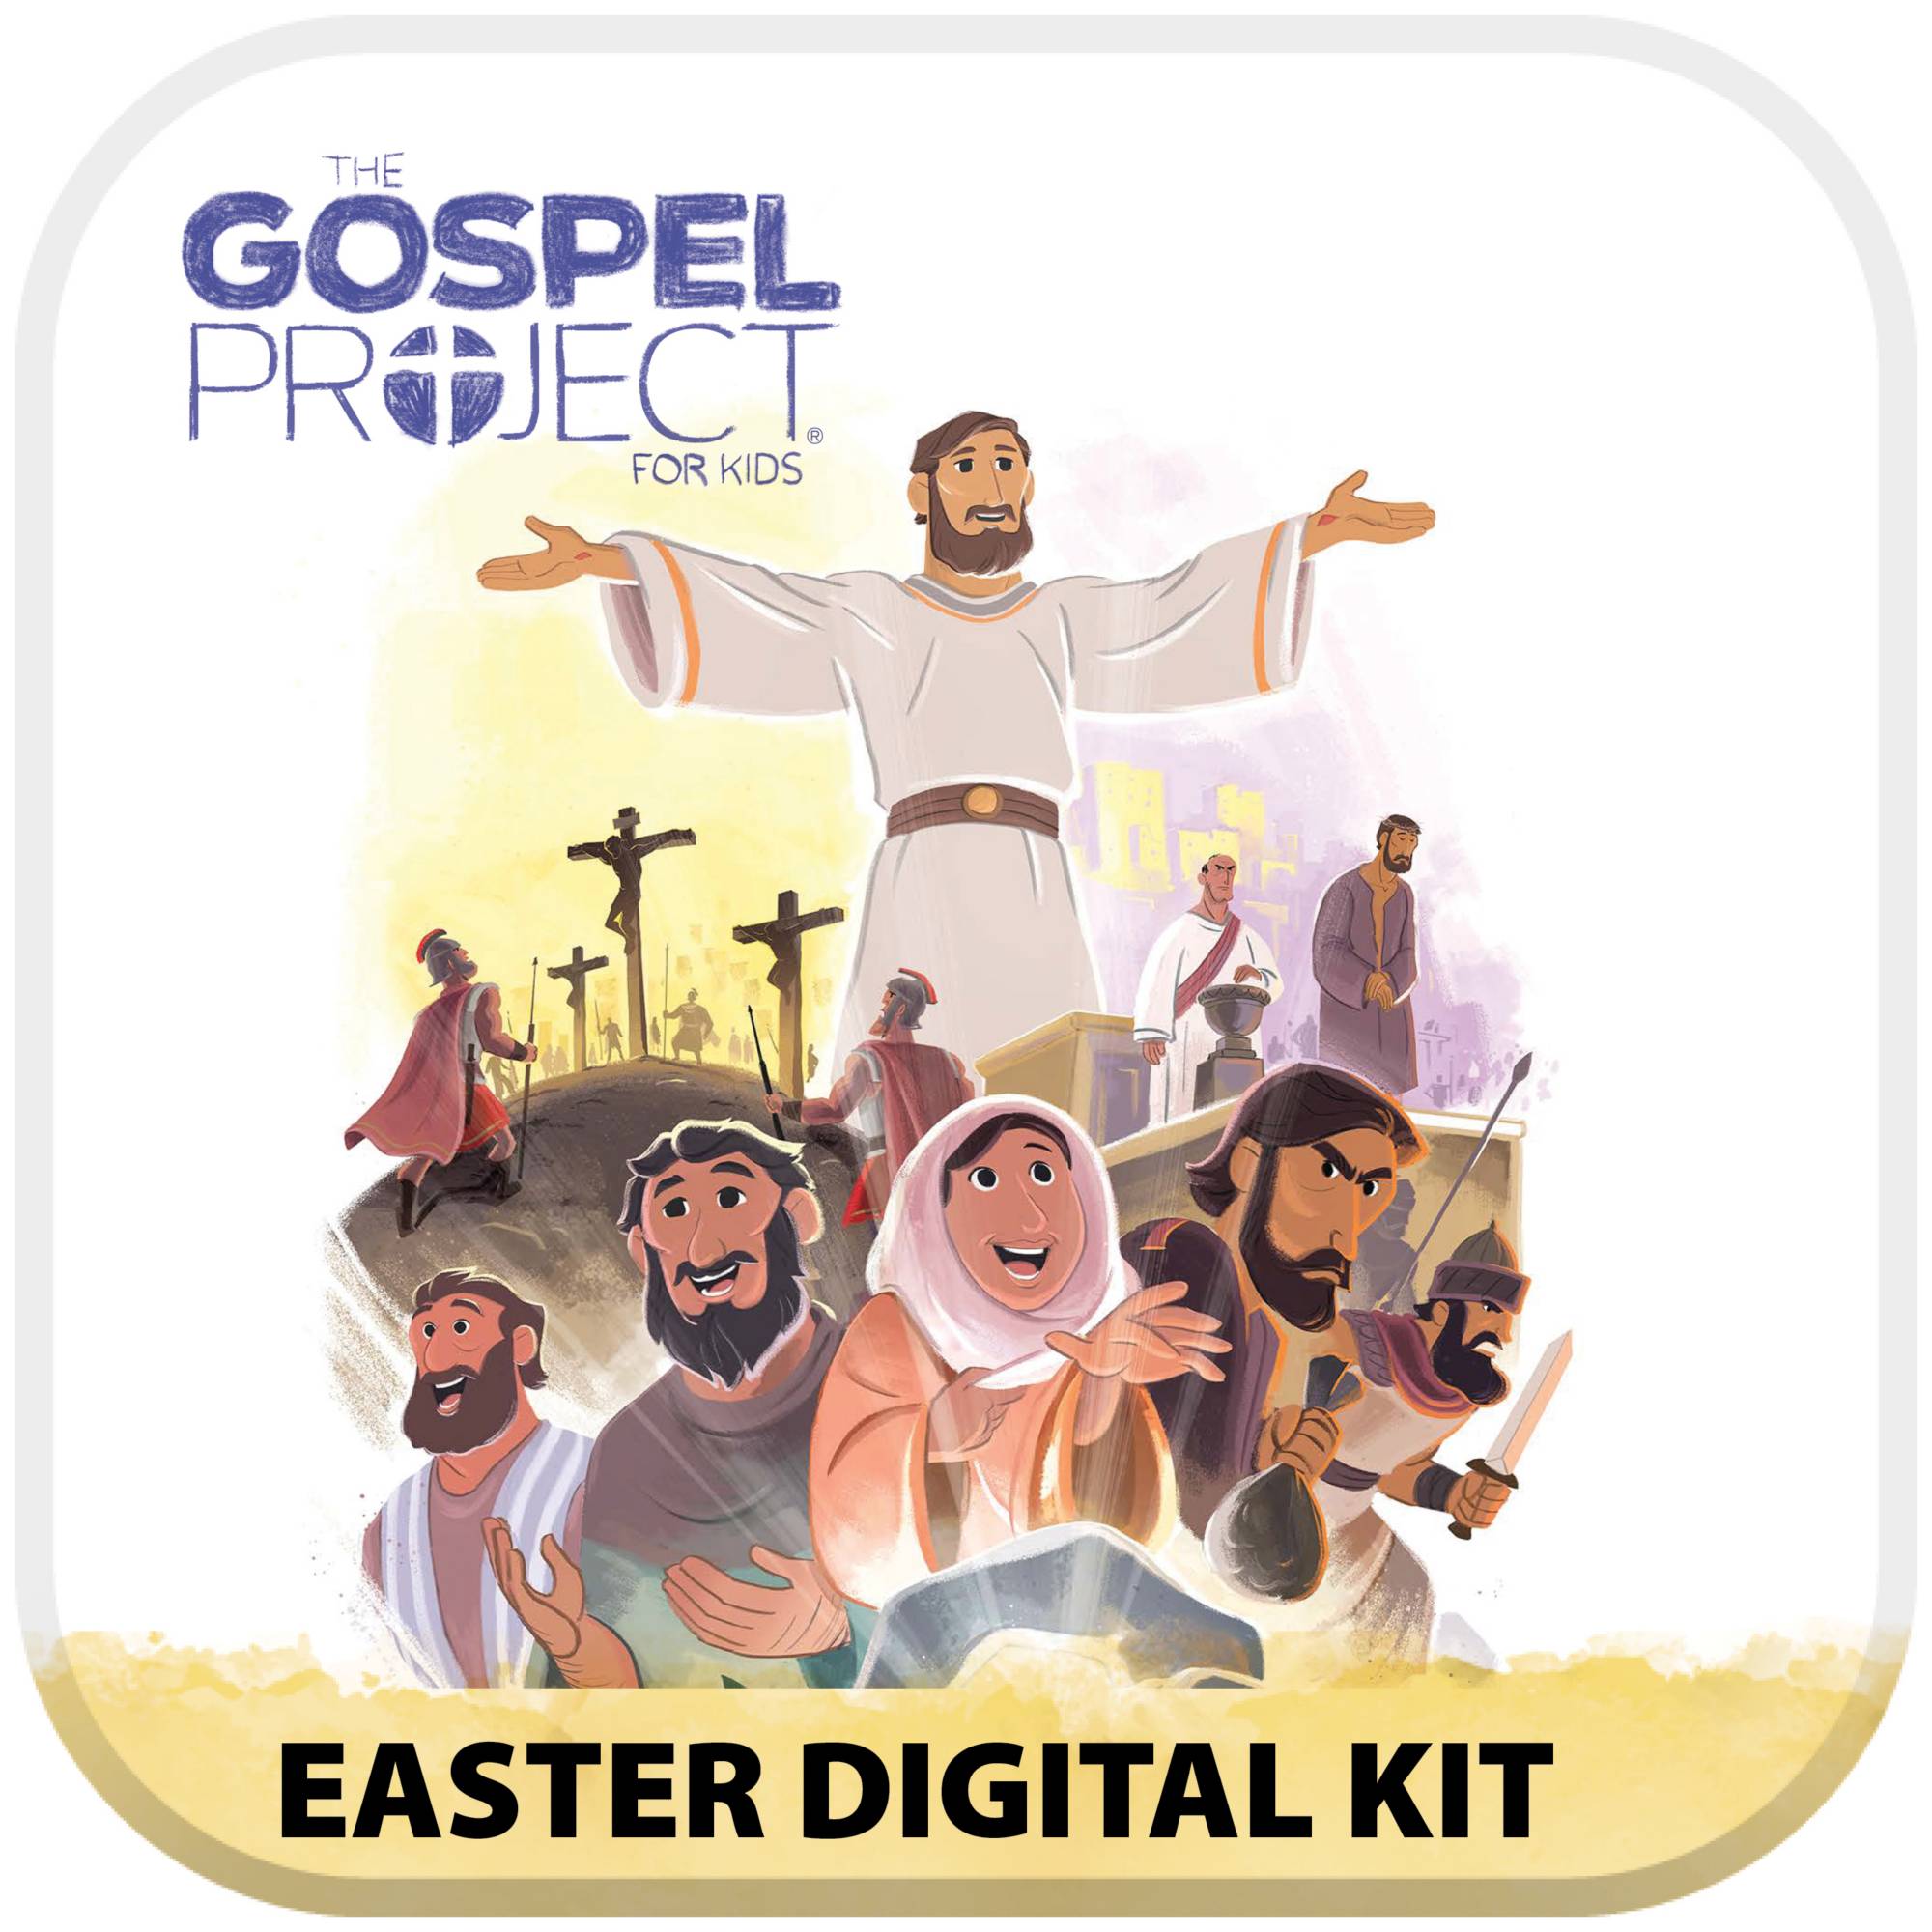 The Gospel Project for Kids: Kids Poster Pack - Volume 1: from Creati